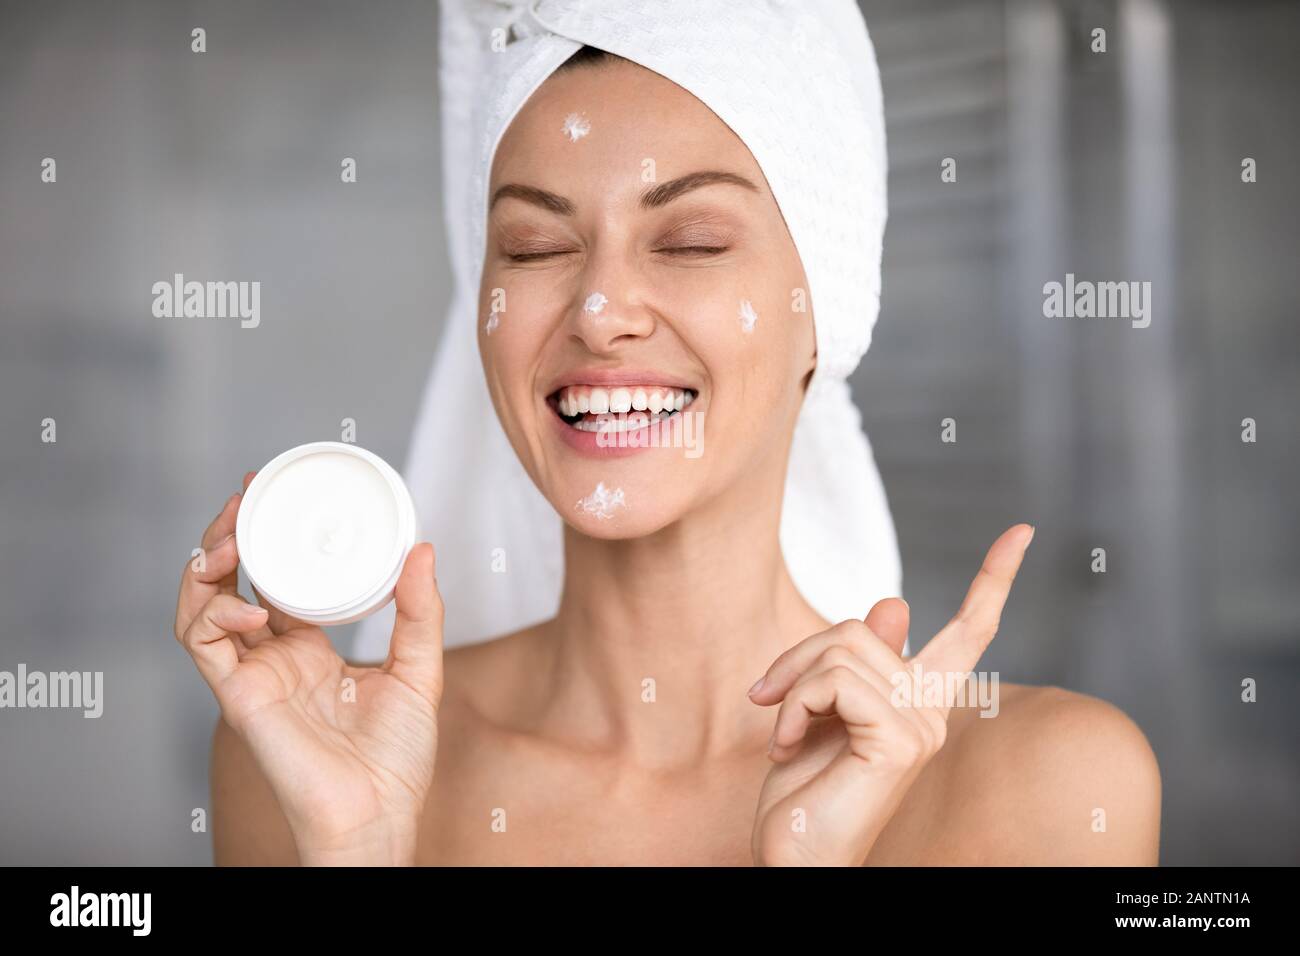 Head shot laughing funny beautiful woman holding face cream Stock Photo